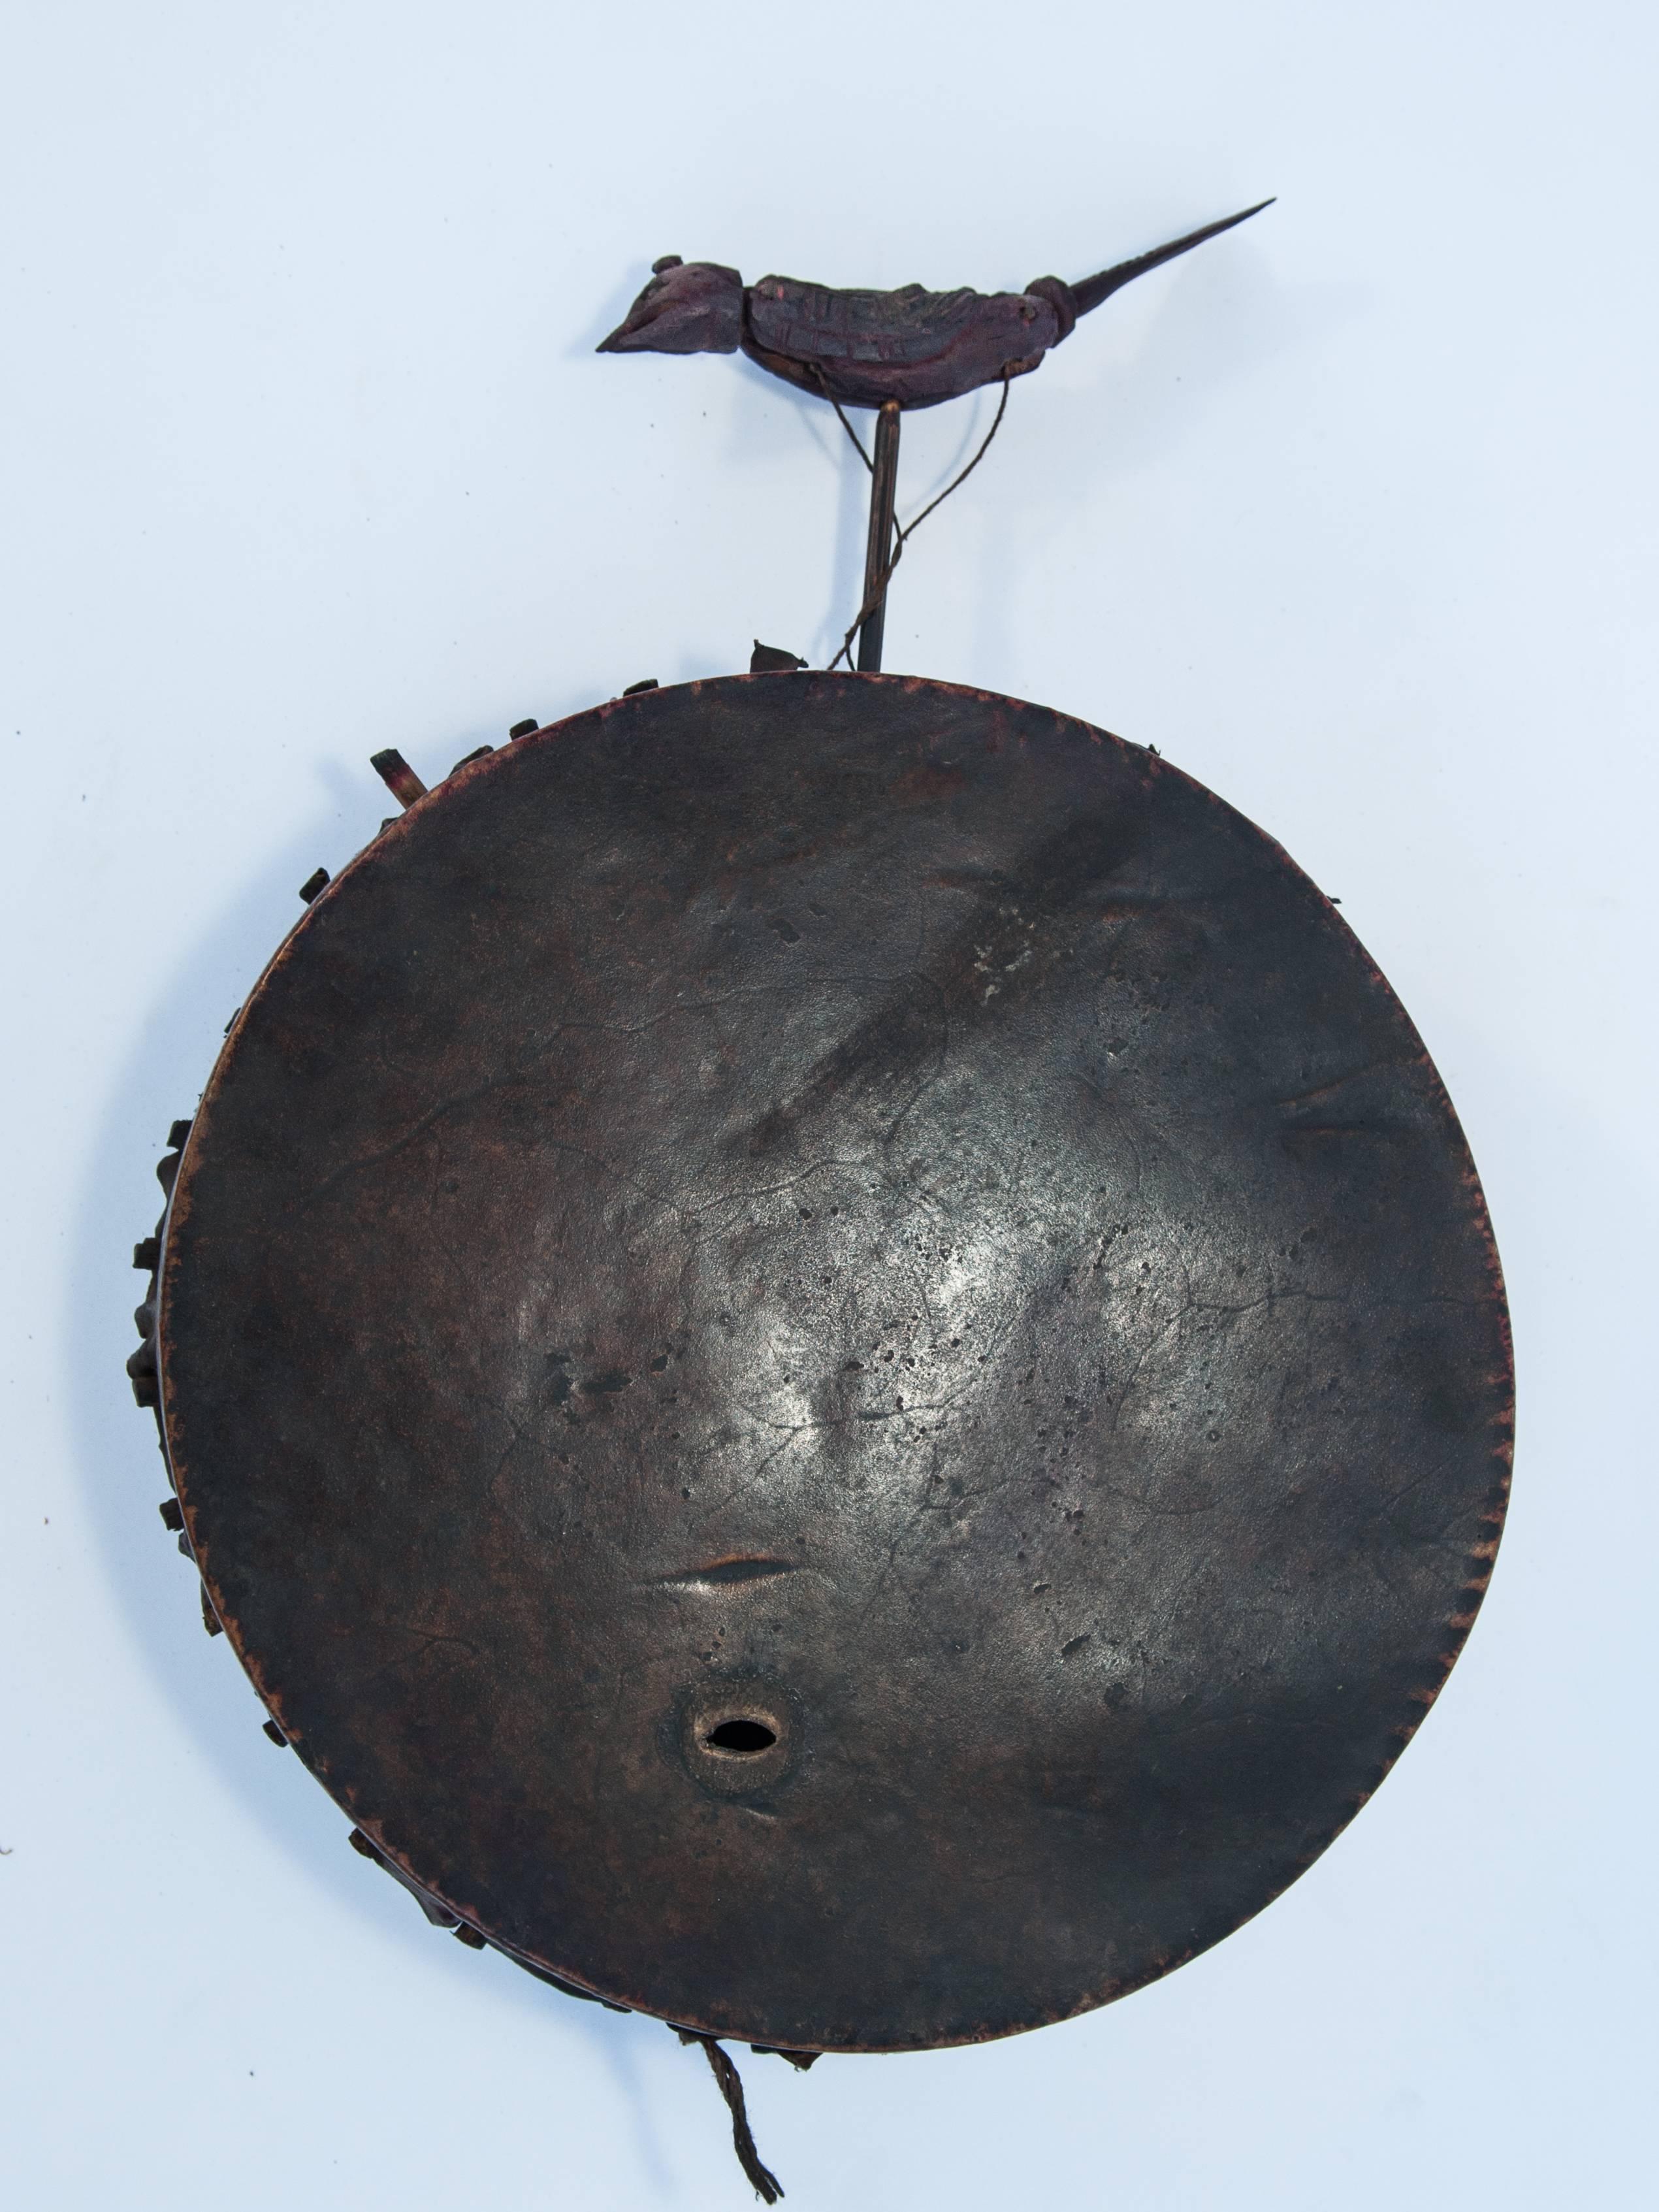 Shaman drum with carved bird. From Nepal, mid-20th century.
Fashioned by hand with the unusual feature of an articulated bird extending from the top of the drum. There is a single and very old hole in the face of the hide. 
Dimensions: 10 inches by